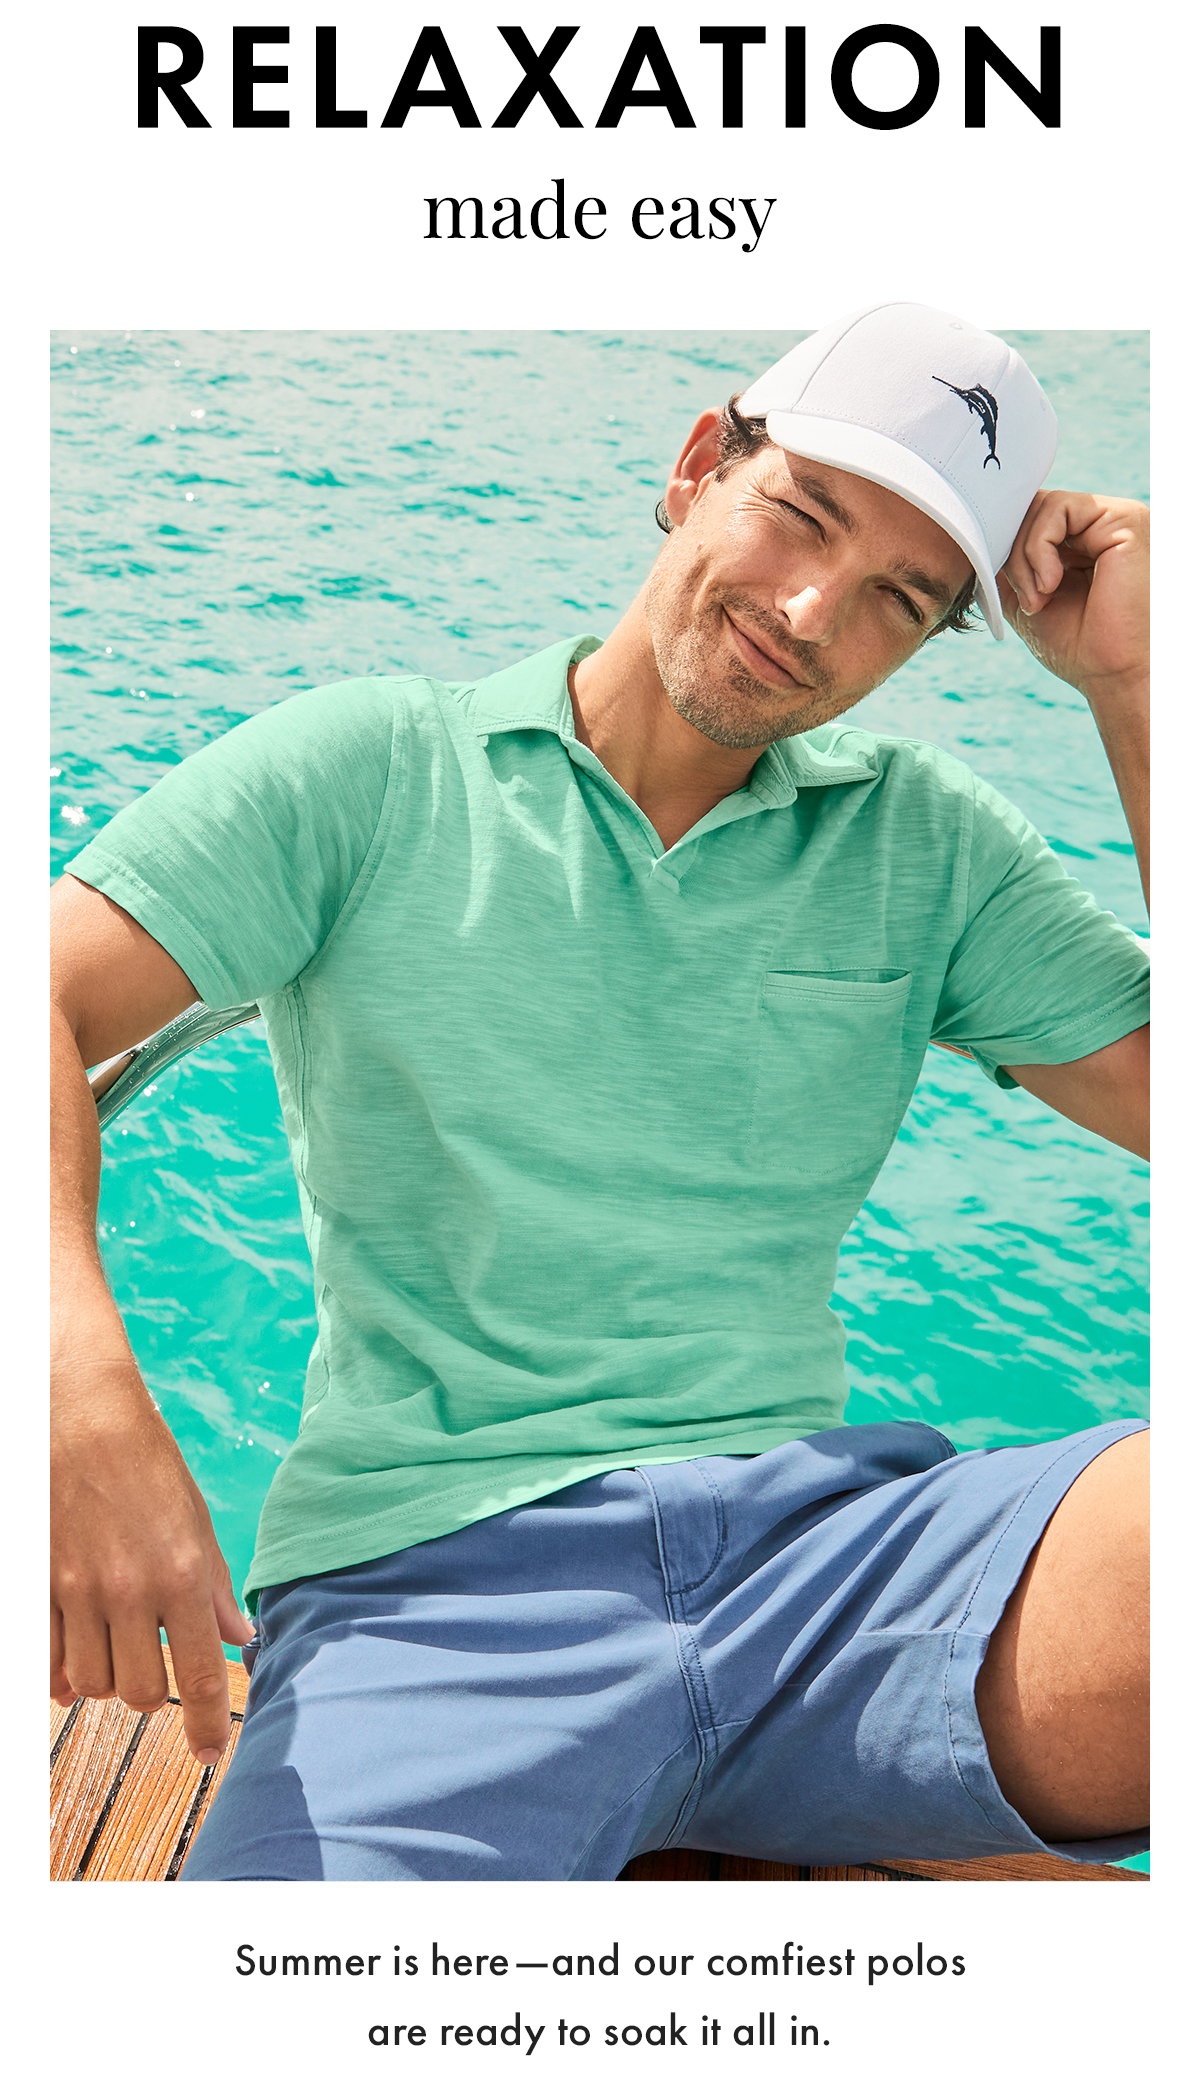 Relaxation made easy. Summer is here - and our comfiest polos are ready to soak it all it.